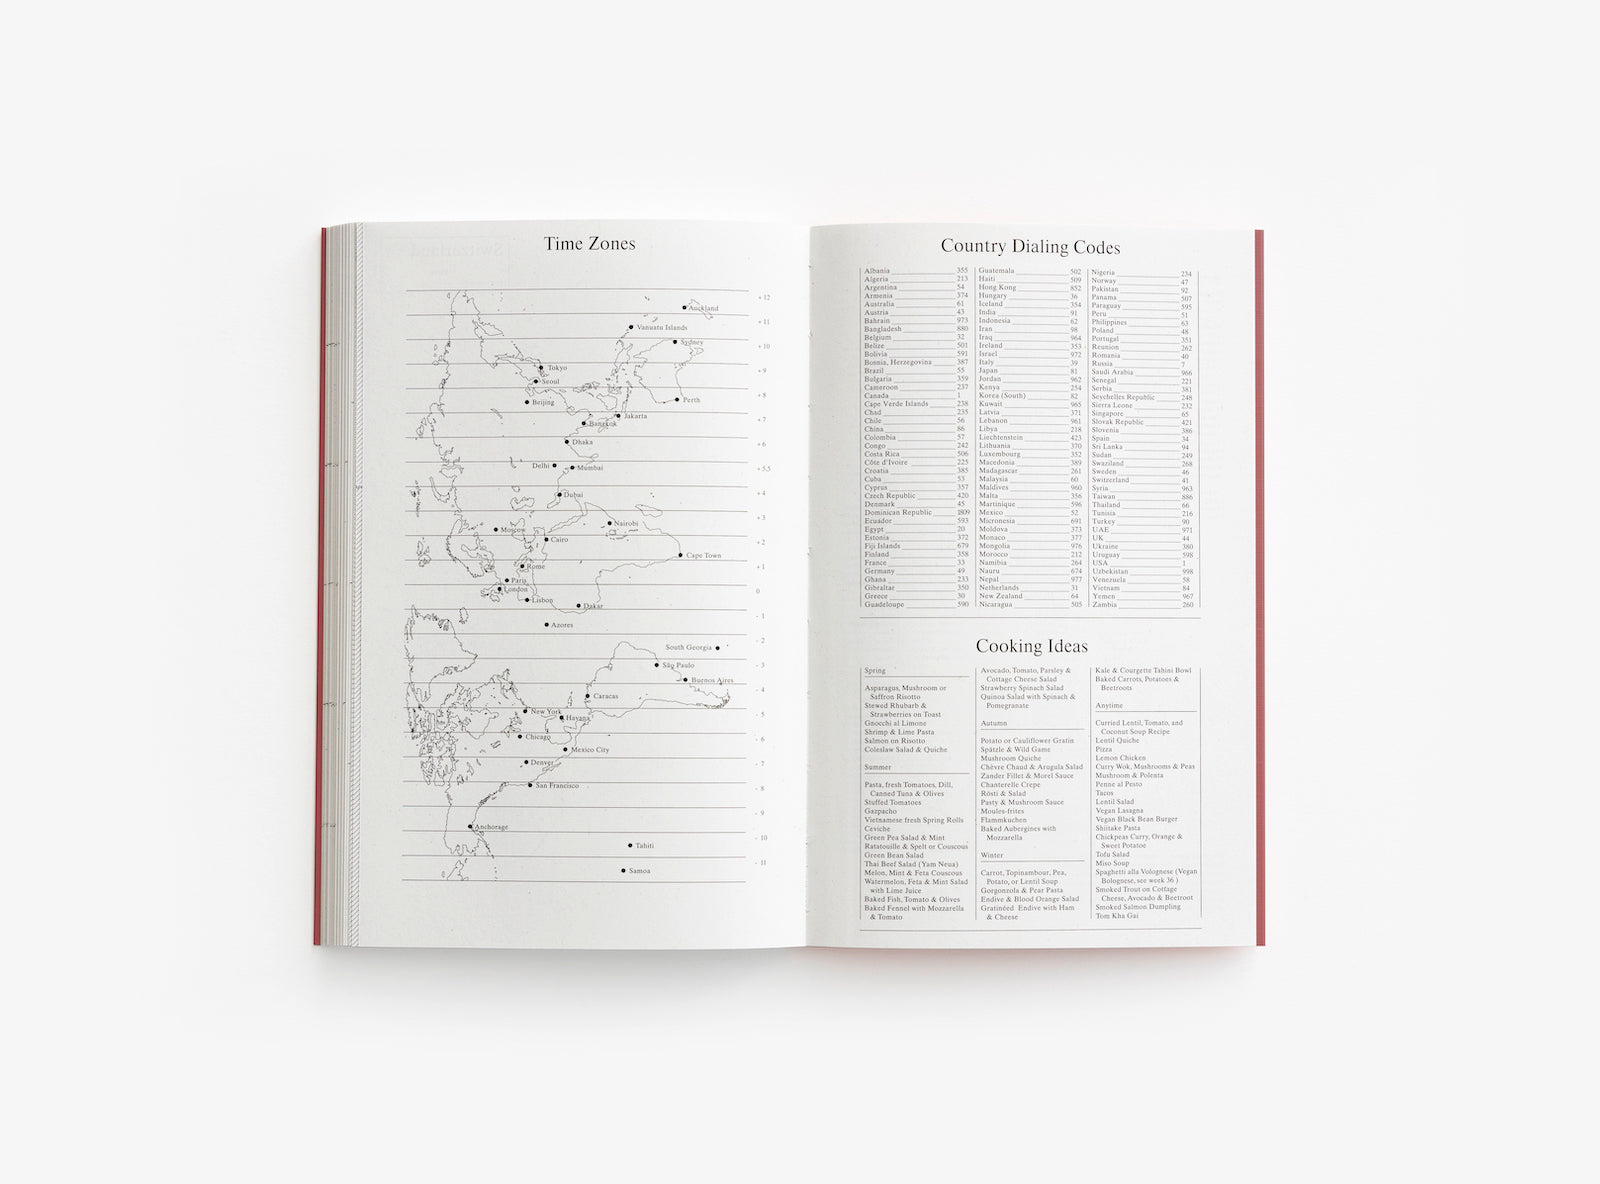 Spread from our 2021 planner with the time zones, country dealing codes and cooking ideas.